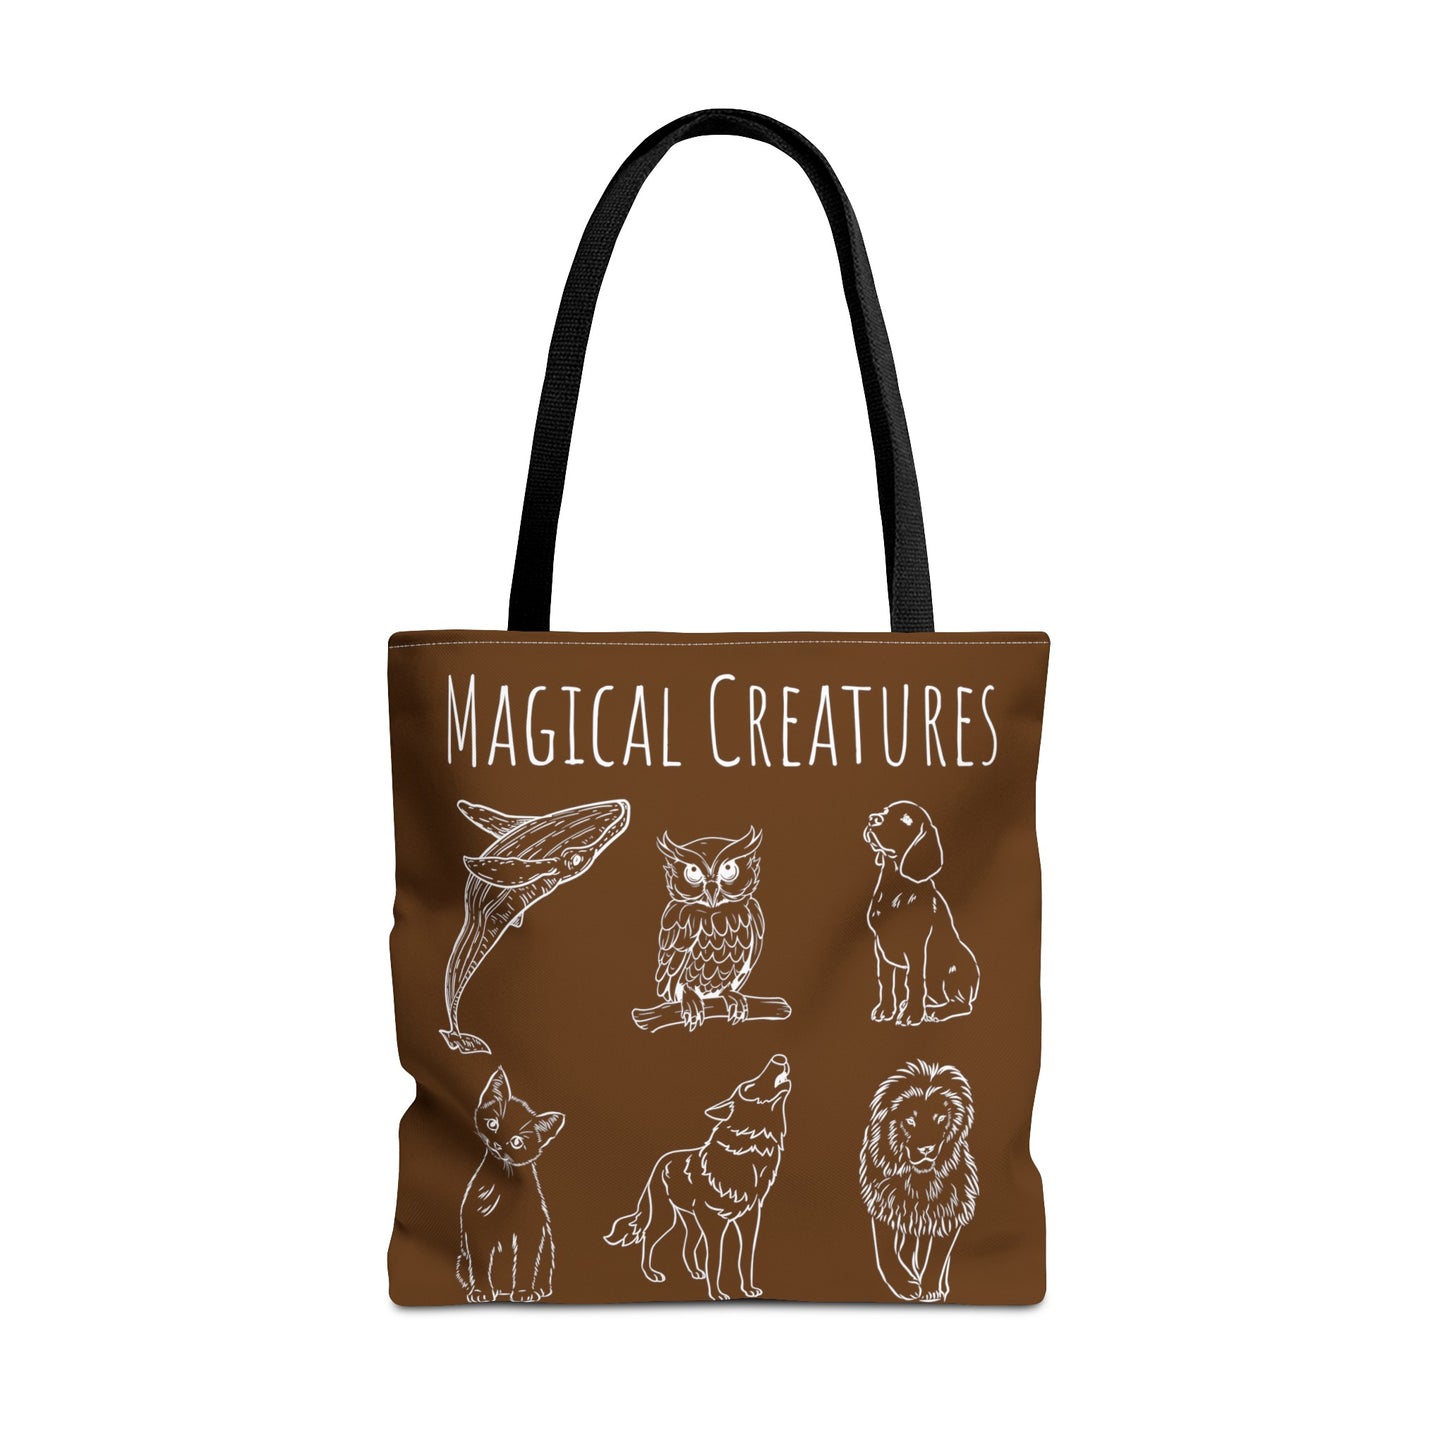 Magical Creatures Tote Bag (Magical Studies Collection)